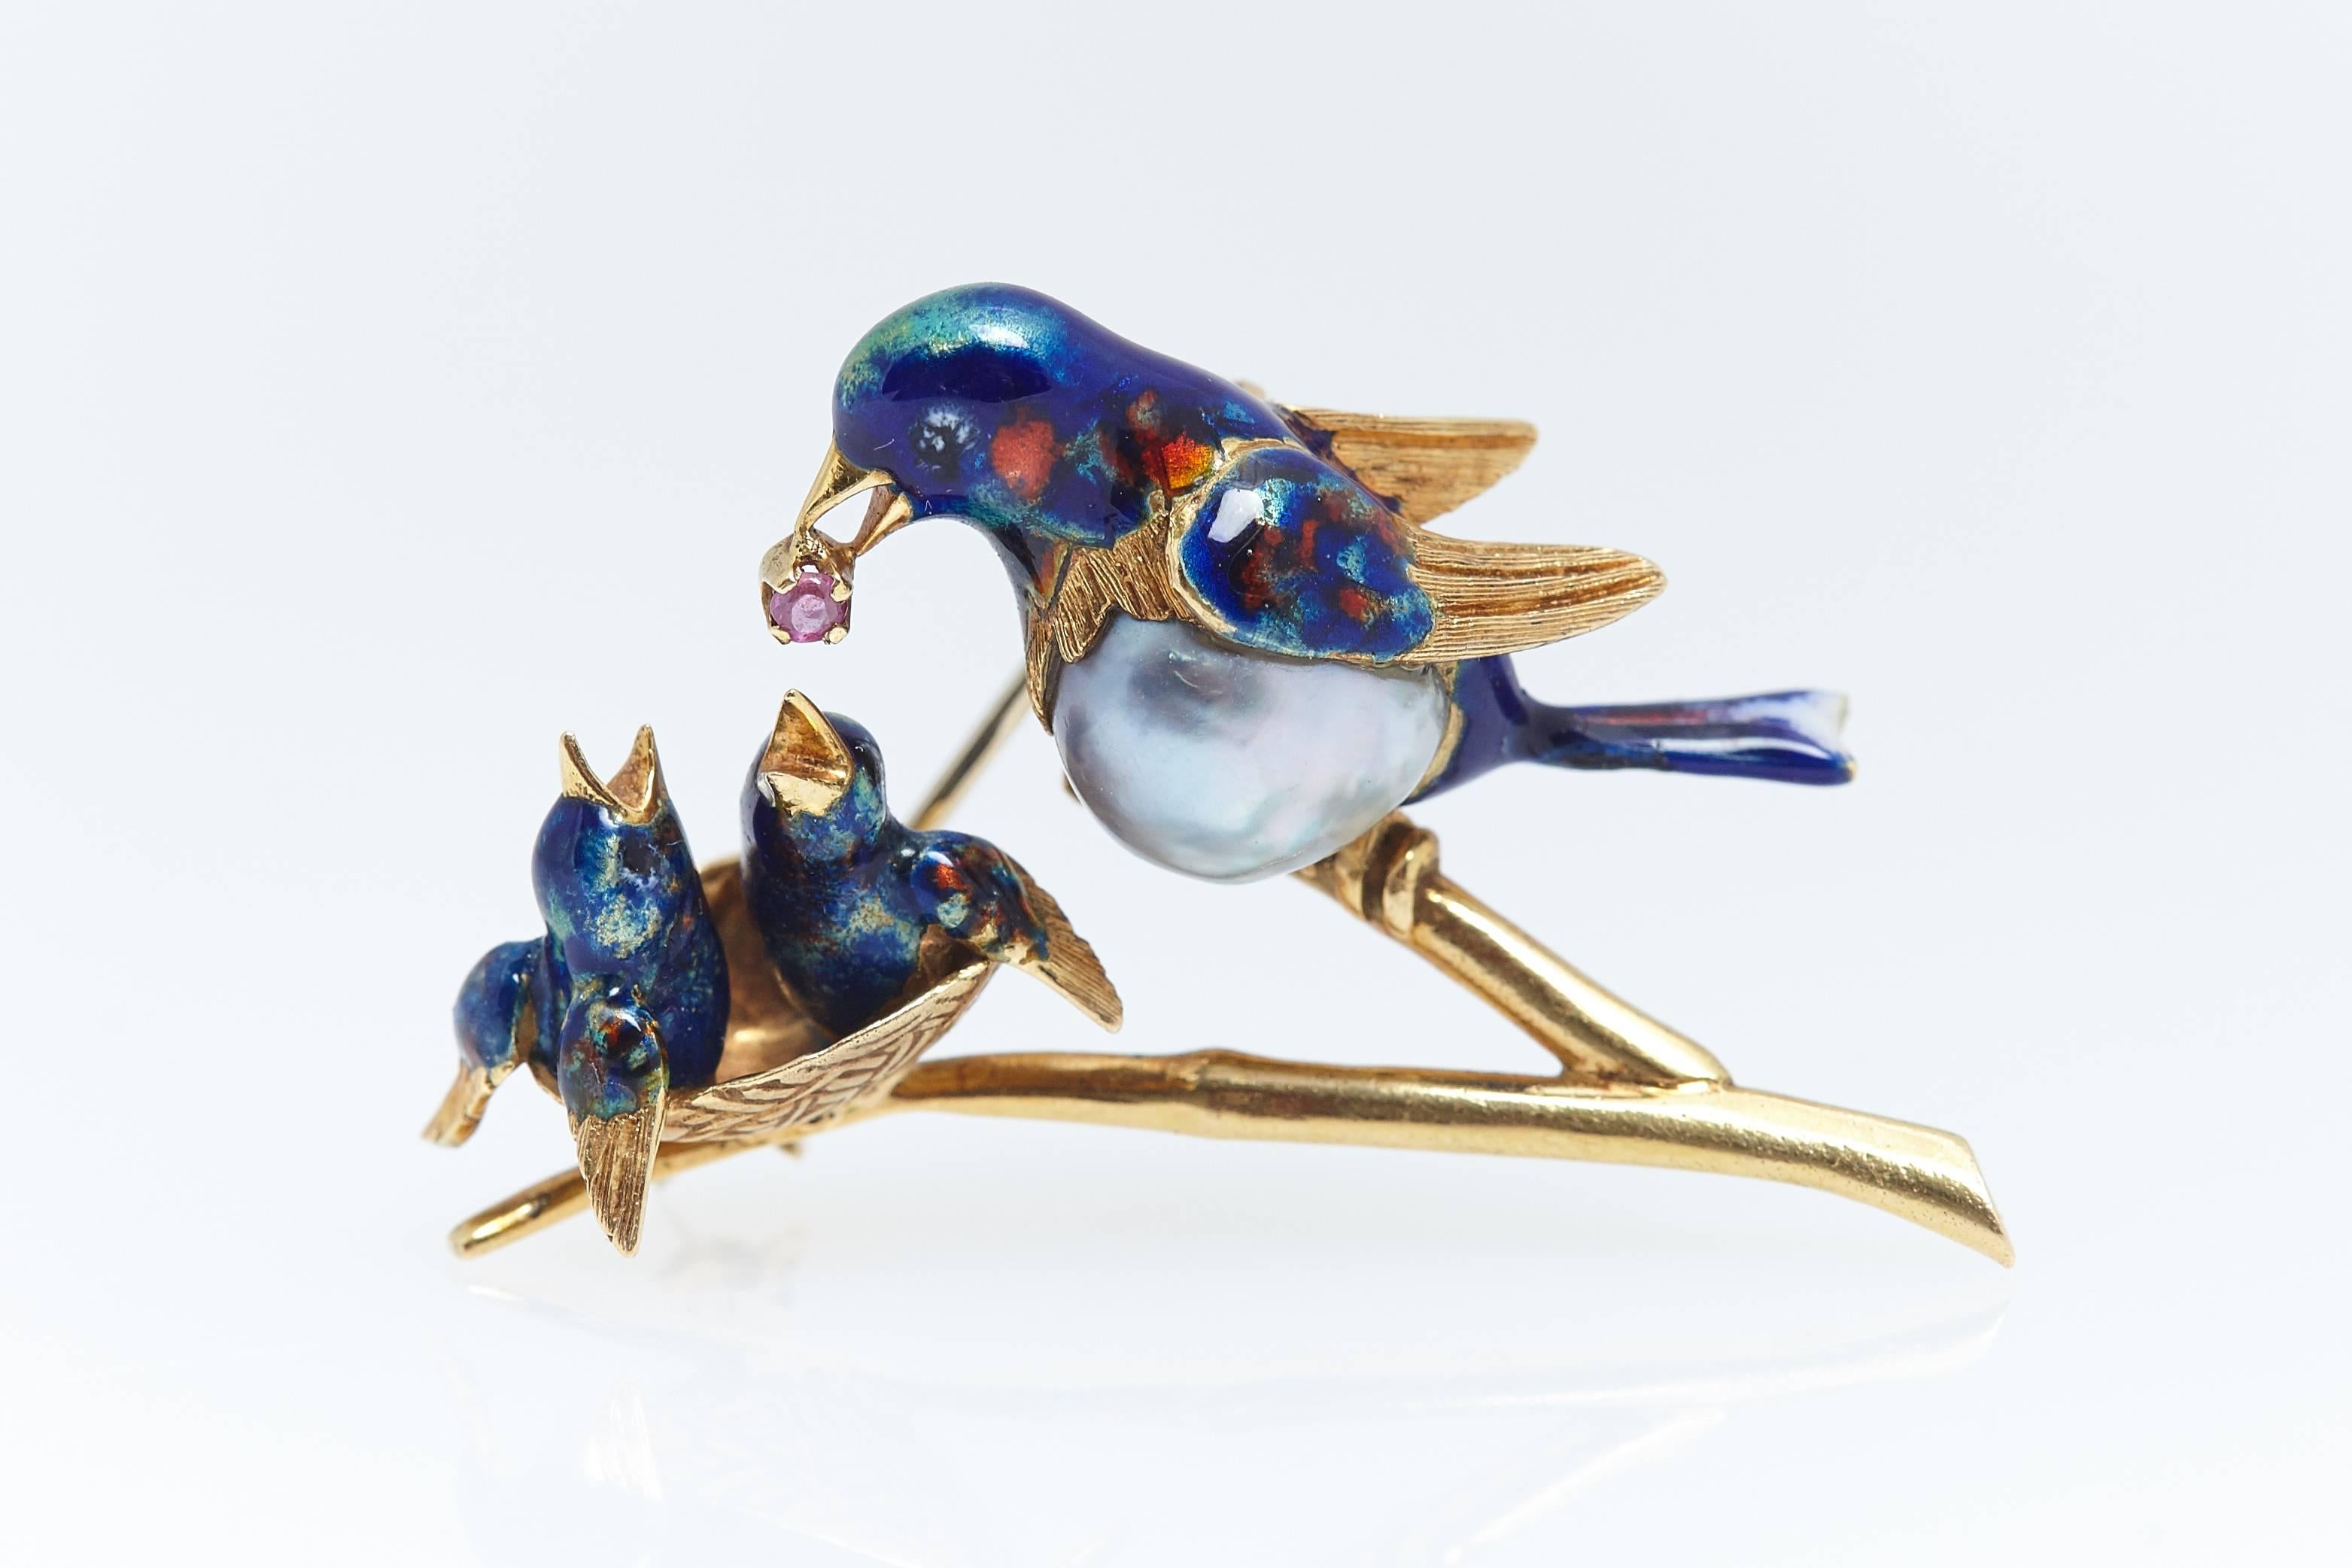 What you expect from Cartier. This beautiful enamel pin made with a pearl, enamel and 18 karat yellow gold of a mother bird feeding her chicks. The pin measures 1 5/8 inch across and approximately 1 inch in height. It is signed "Cartier,